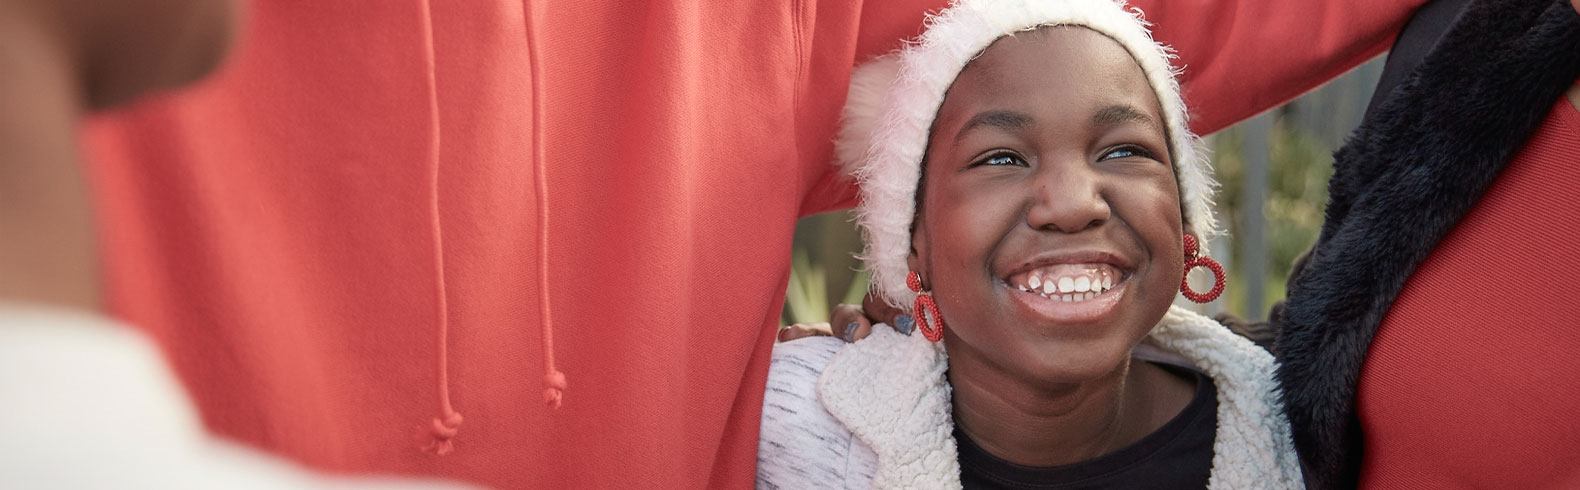 close up on a happy young girls face. She's being embraced by her family.